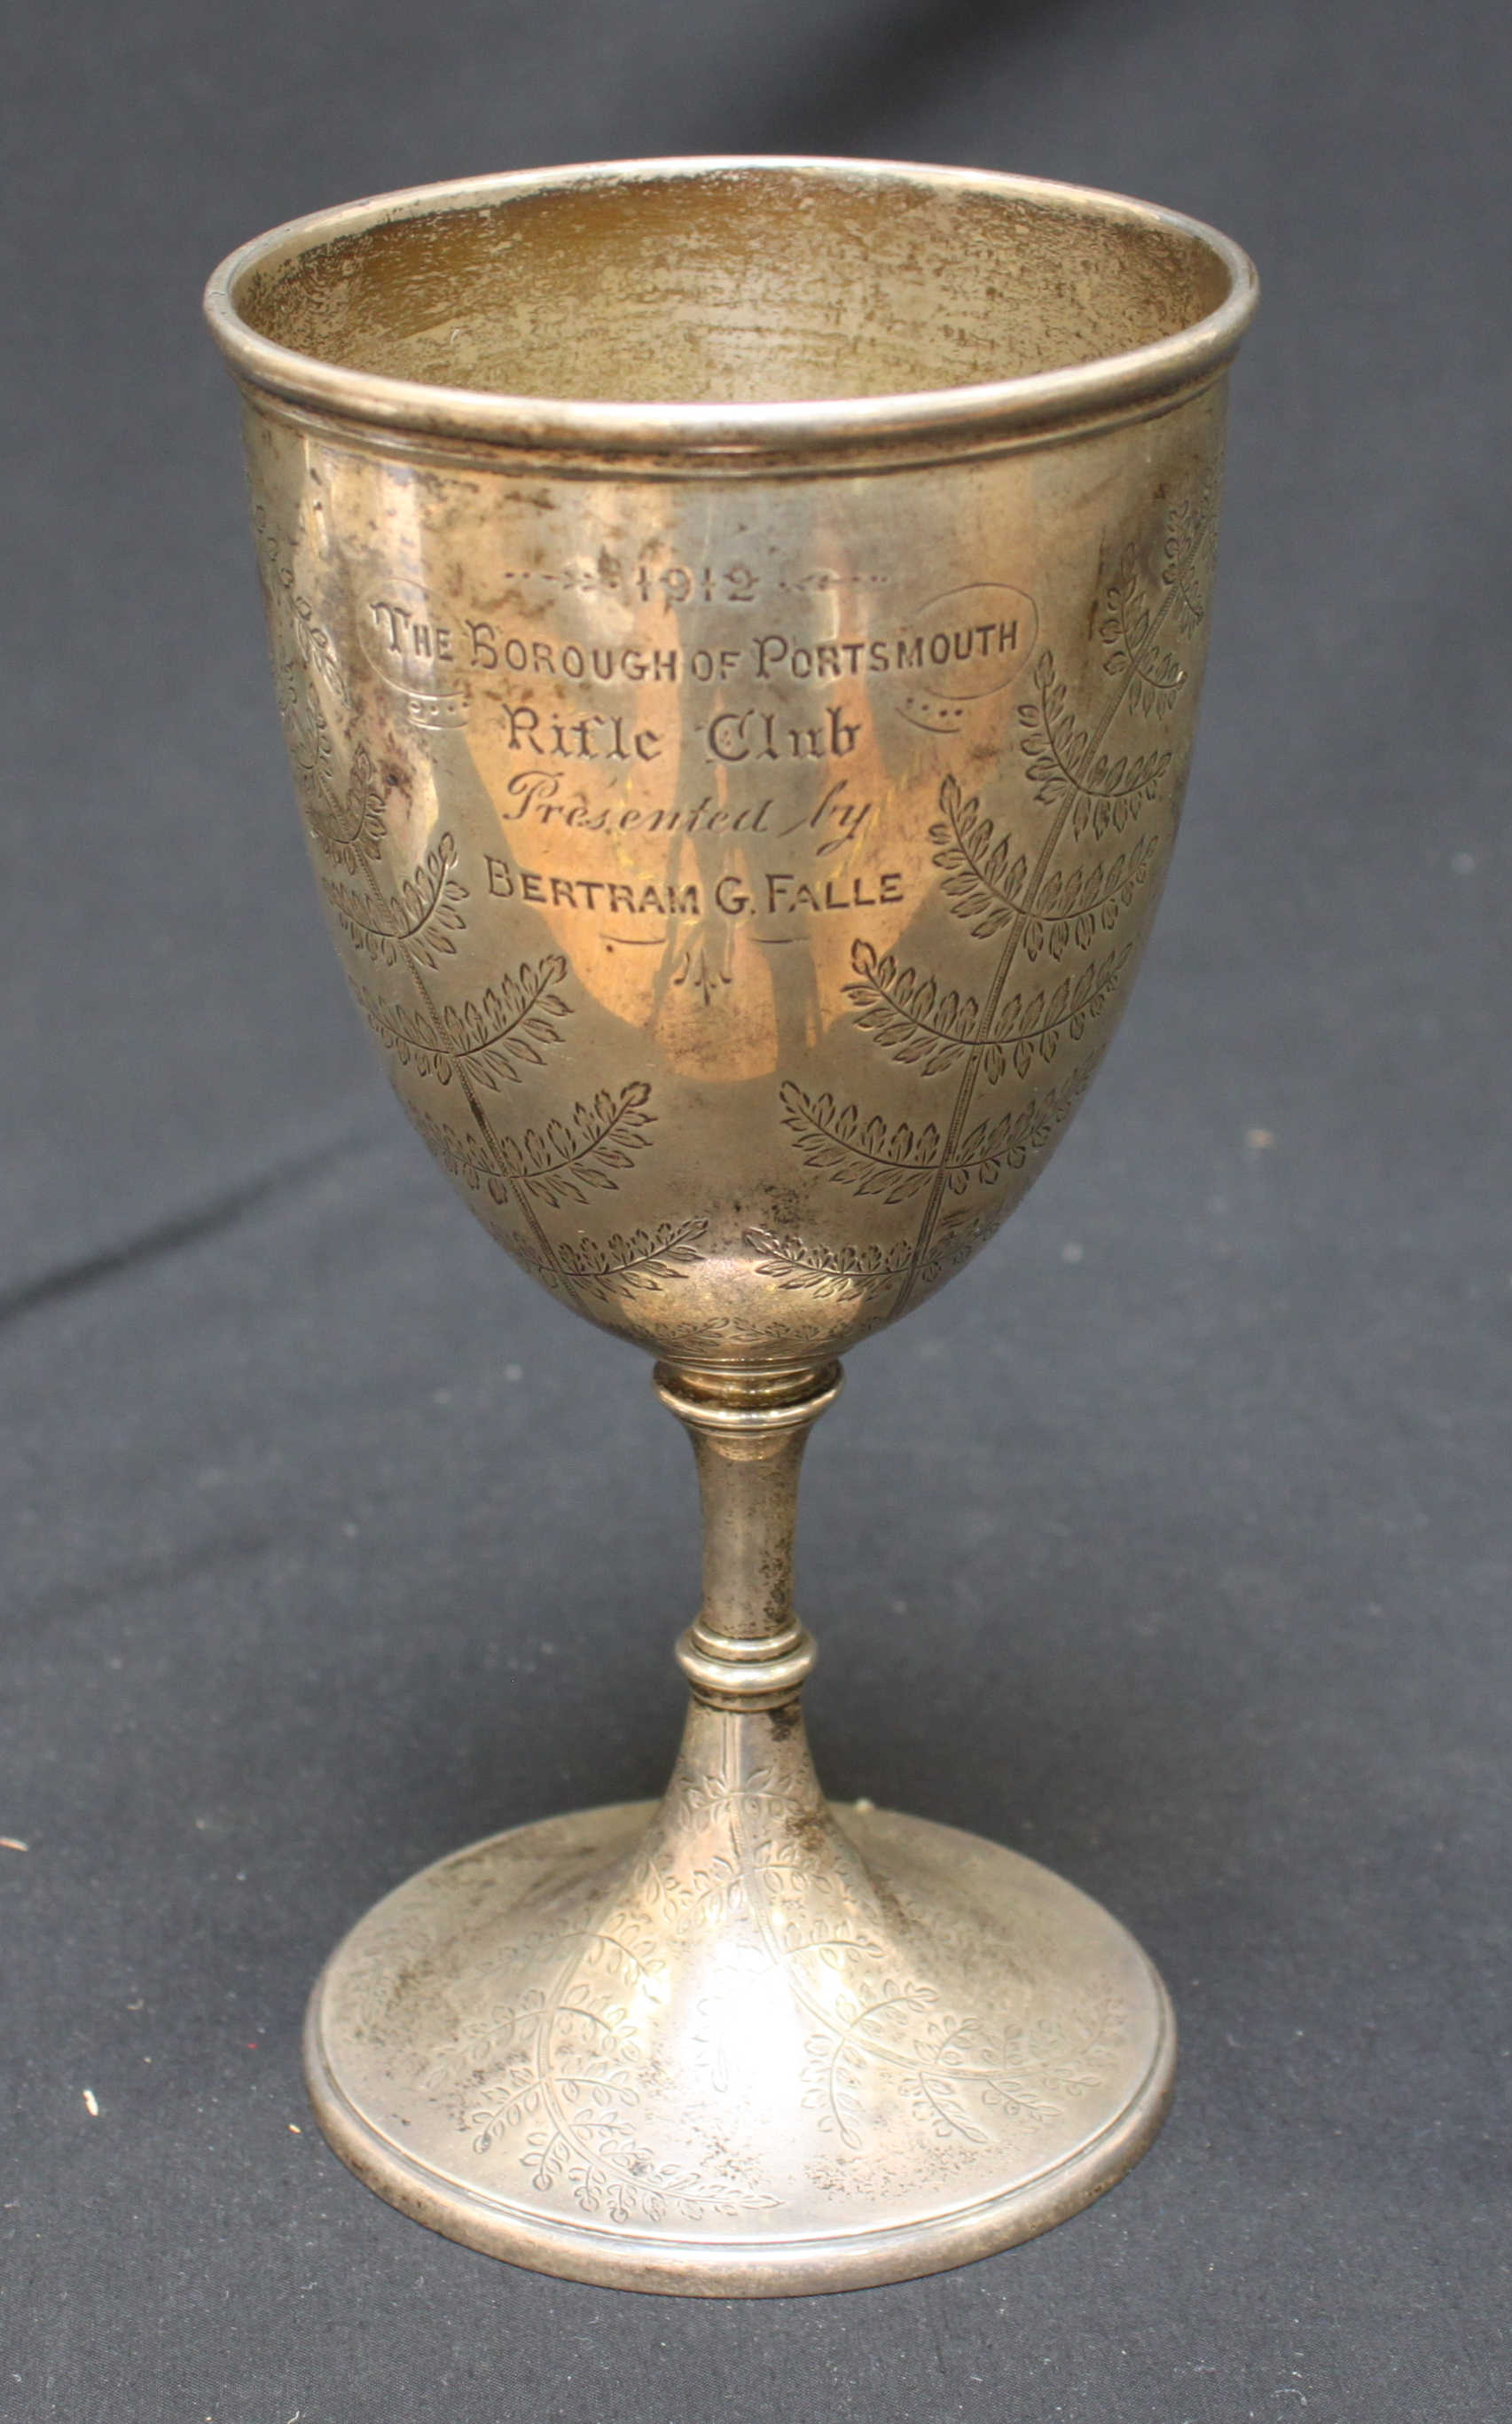 A Silver Goblet commemorating the borough of Portsmouth Rifle club 1912, hallmarked London 1869 by